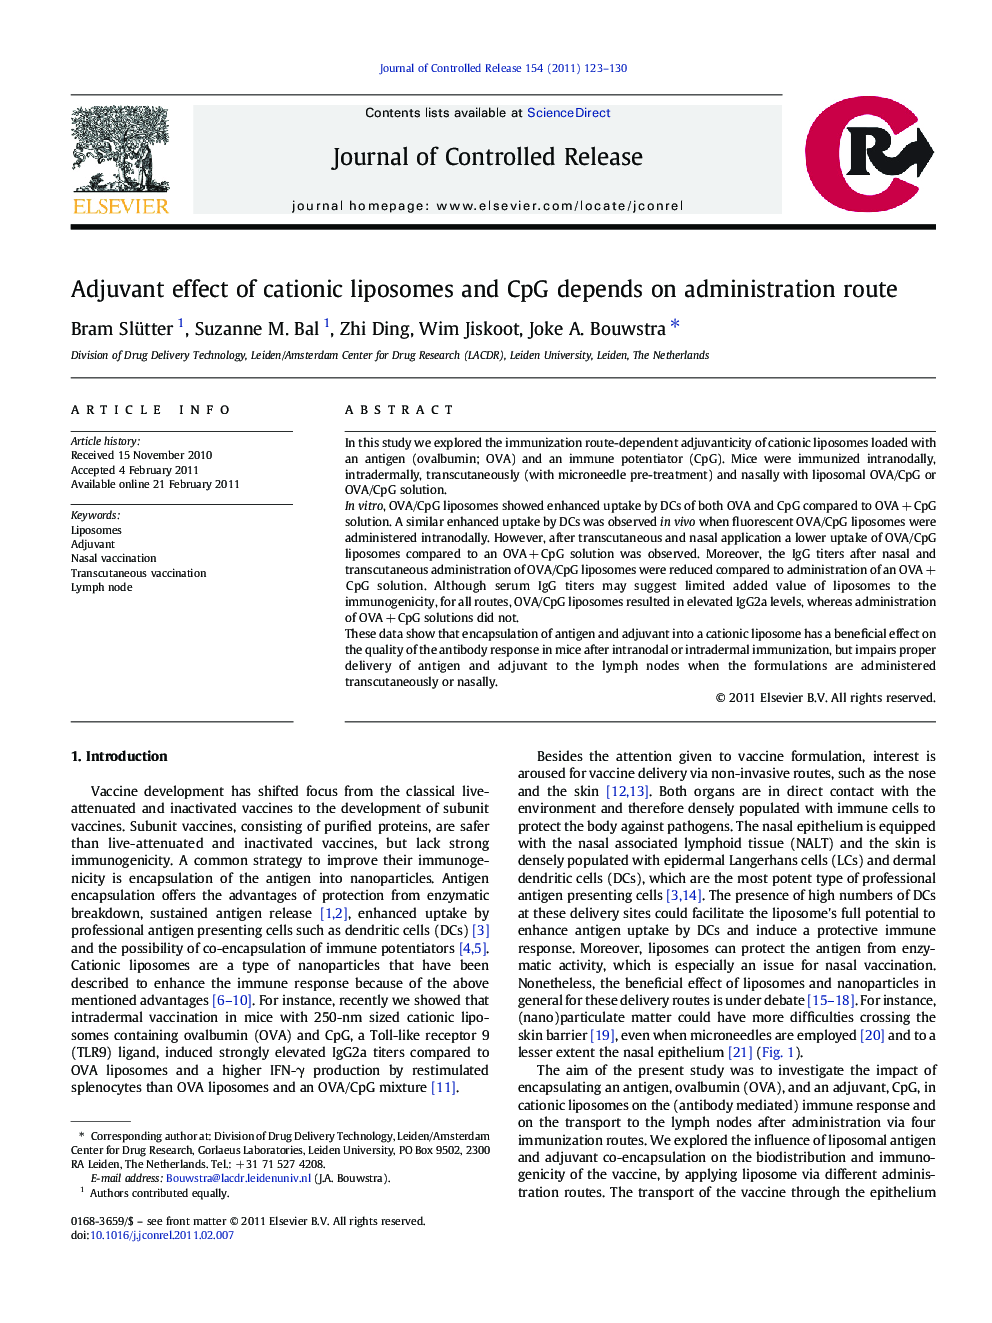 Adjuvant effect of cationic liposomes and CpG depends on administration route